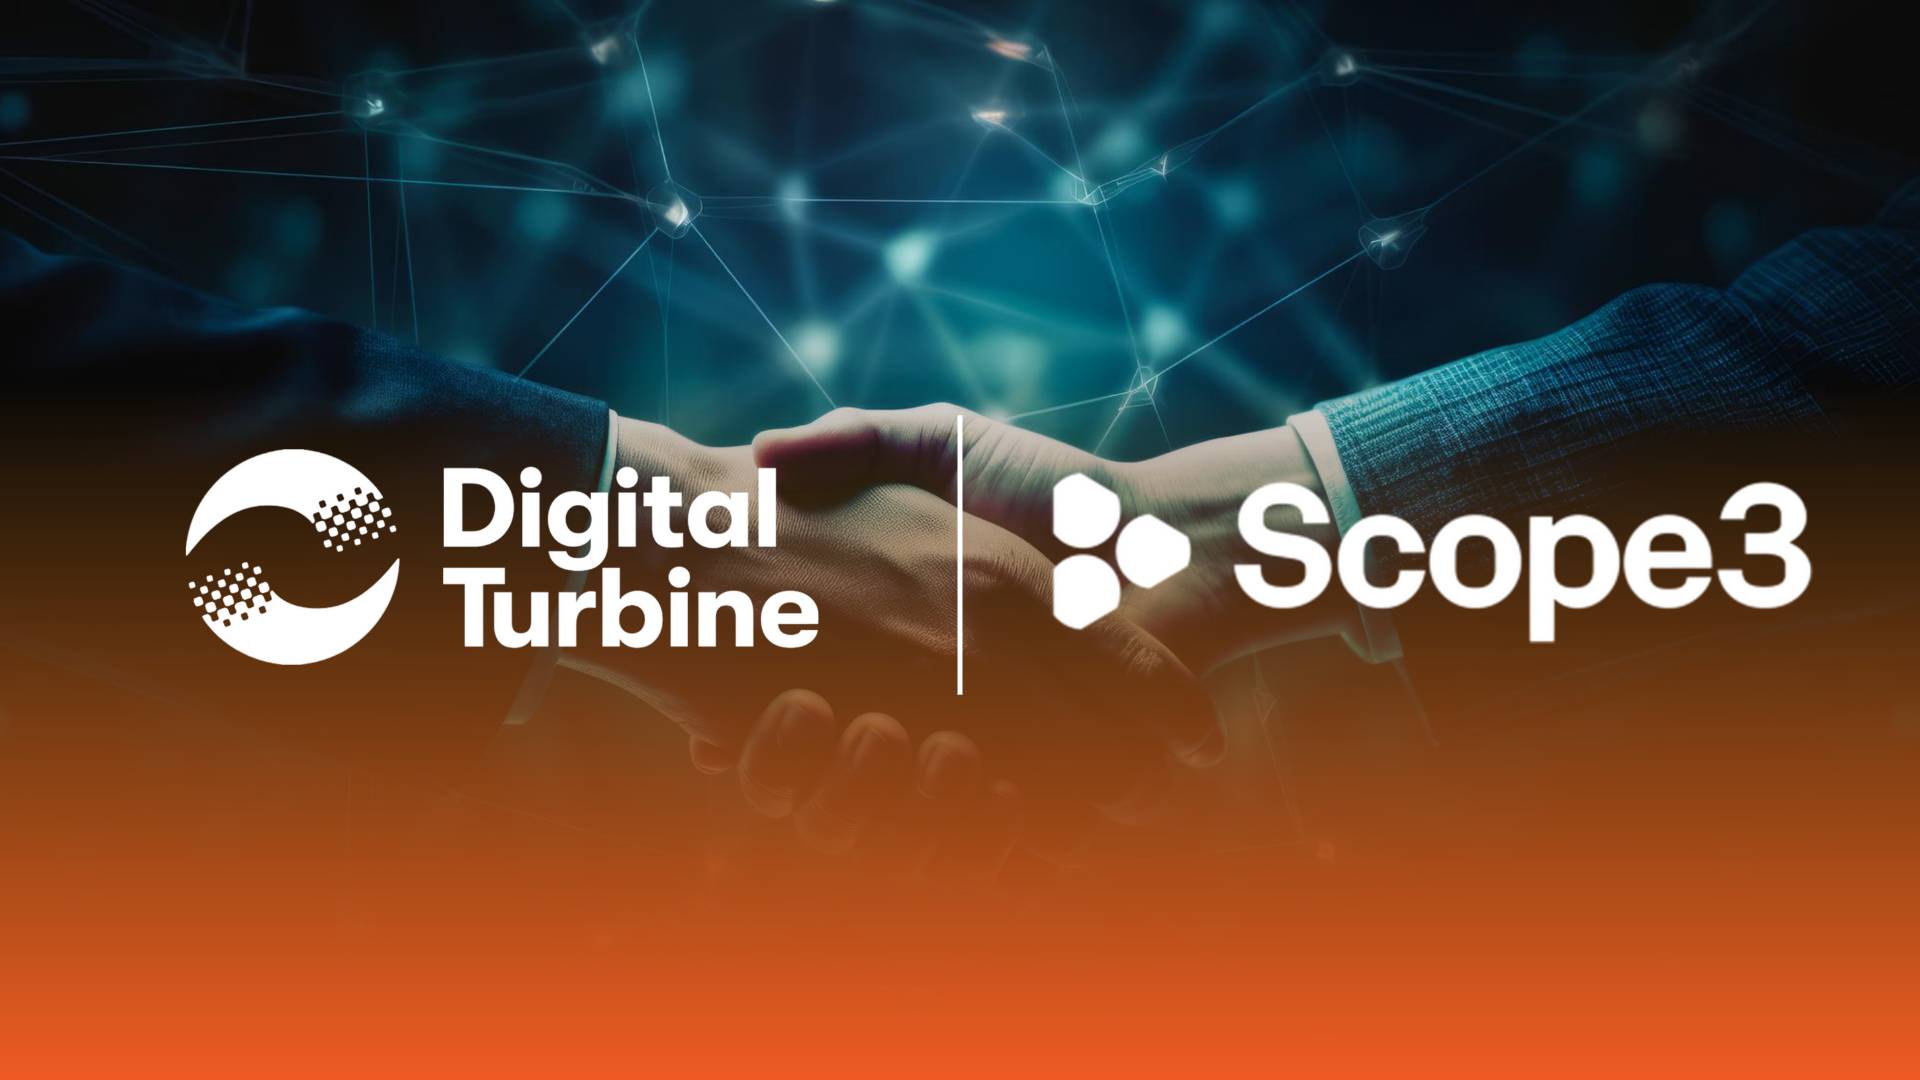 Digital Turbine Partners with Scope3 for Green Mobile Advertising Solutions